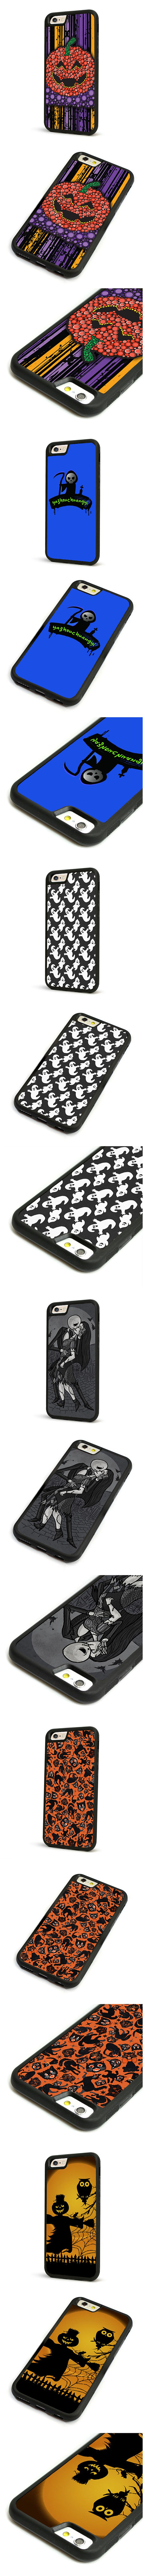 Fashionable-Halloween-Case-TPU-Soft-Back-Cover-For-iPhone-6-Plus-6S-Plus-1001897